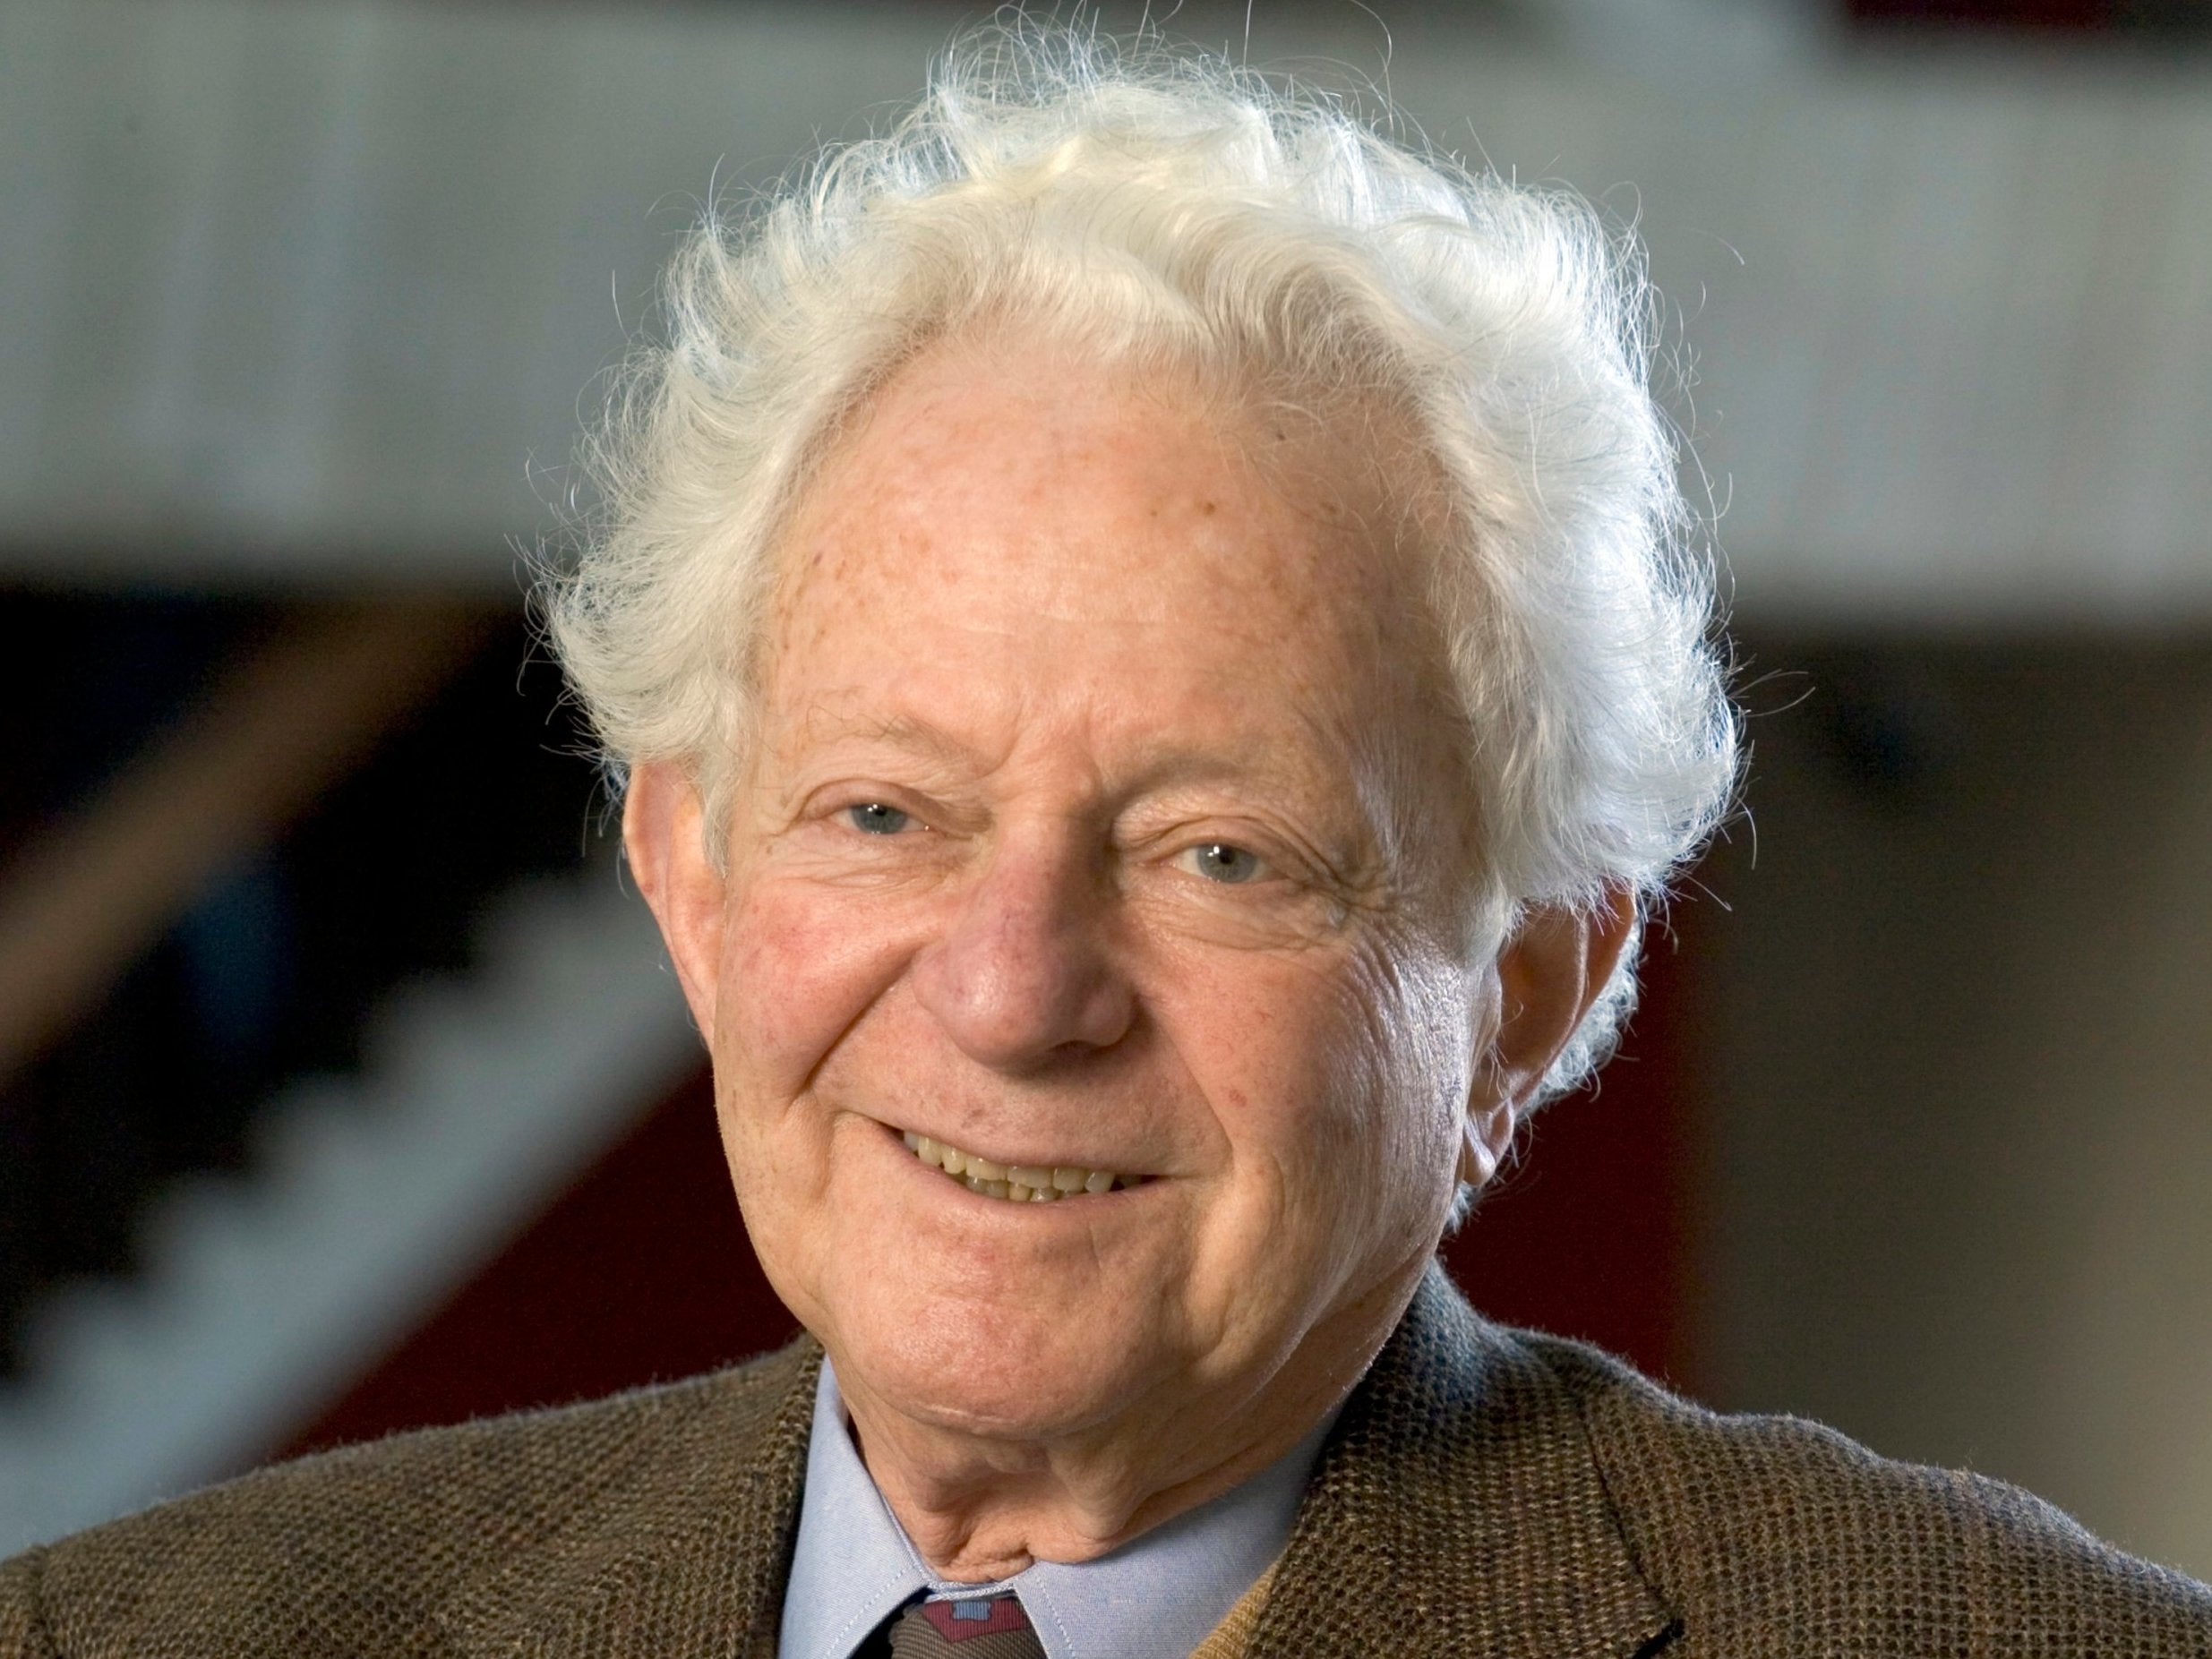 Leon Lederman won a Nobel Prize in physics for his work on subatomic particles